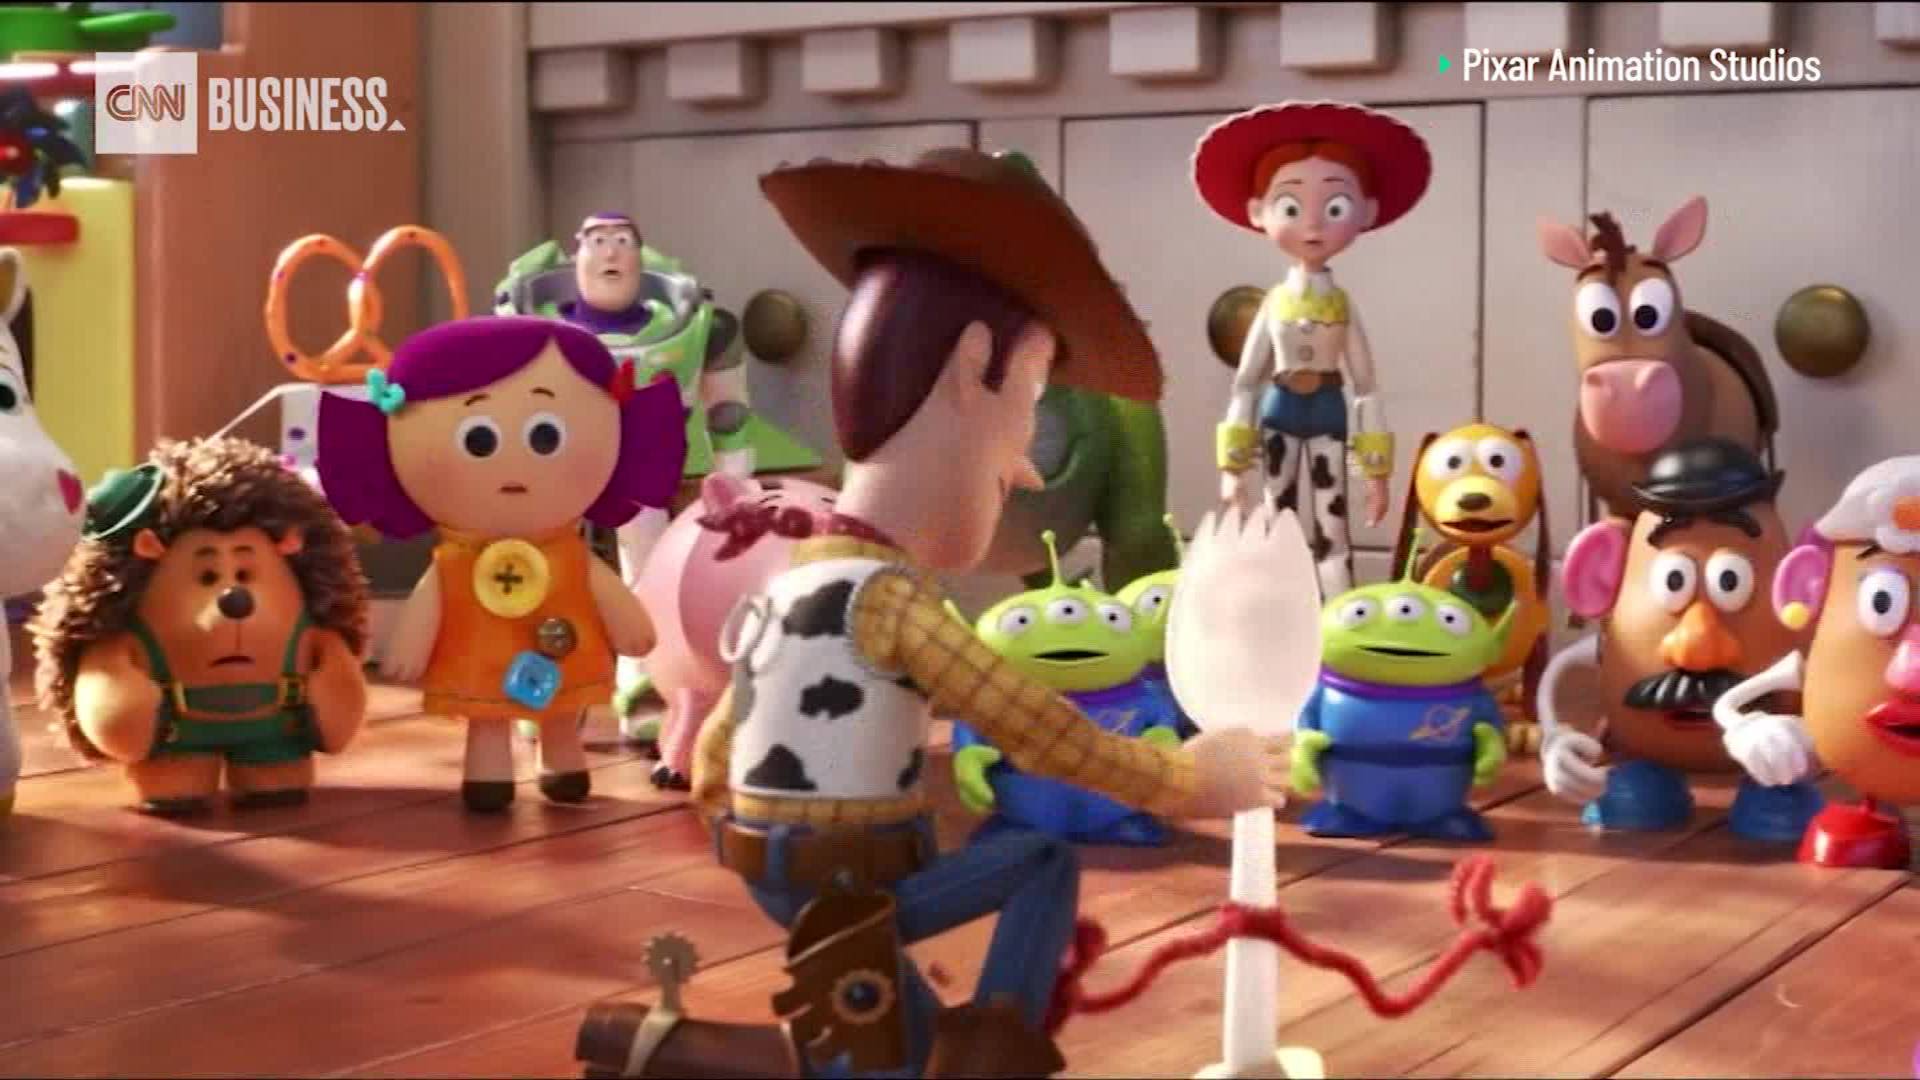 Meet All the New Characters Appearing in Toy Story 4 - D23